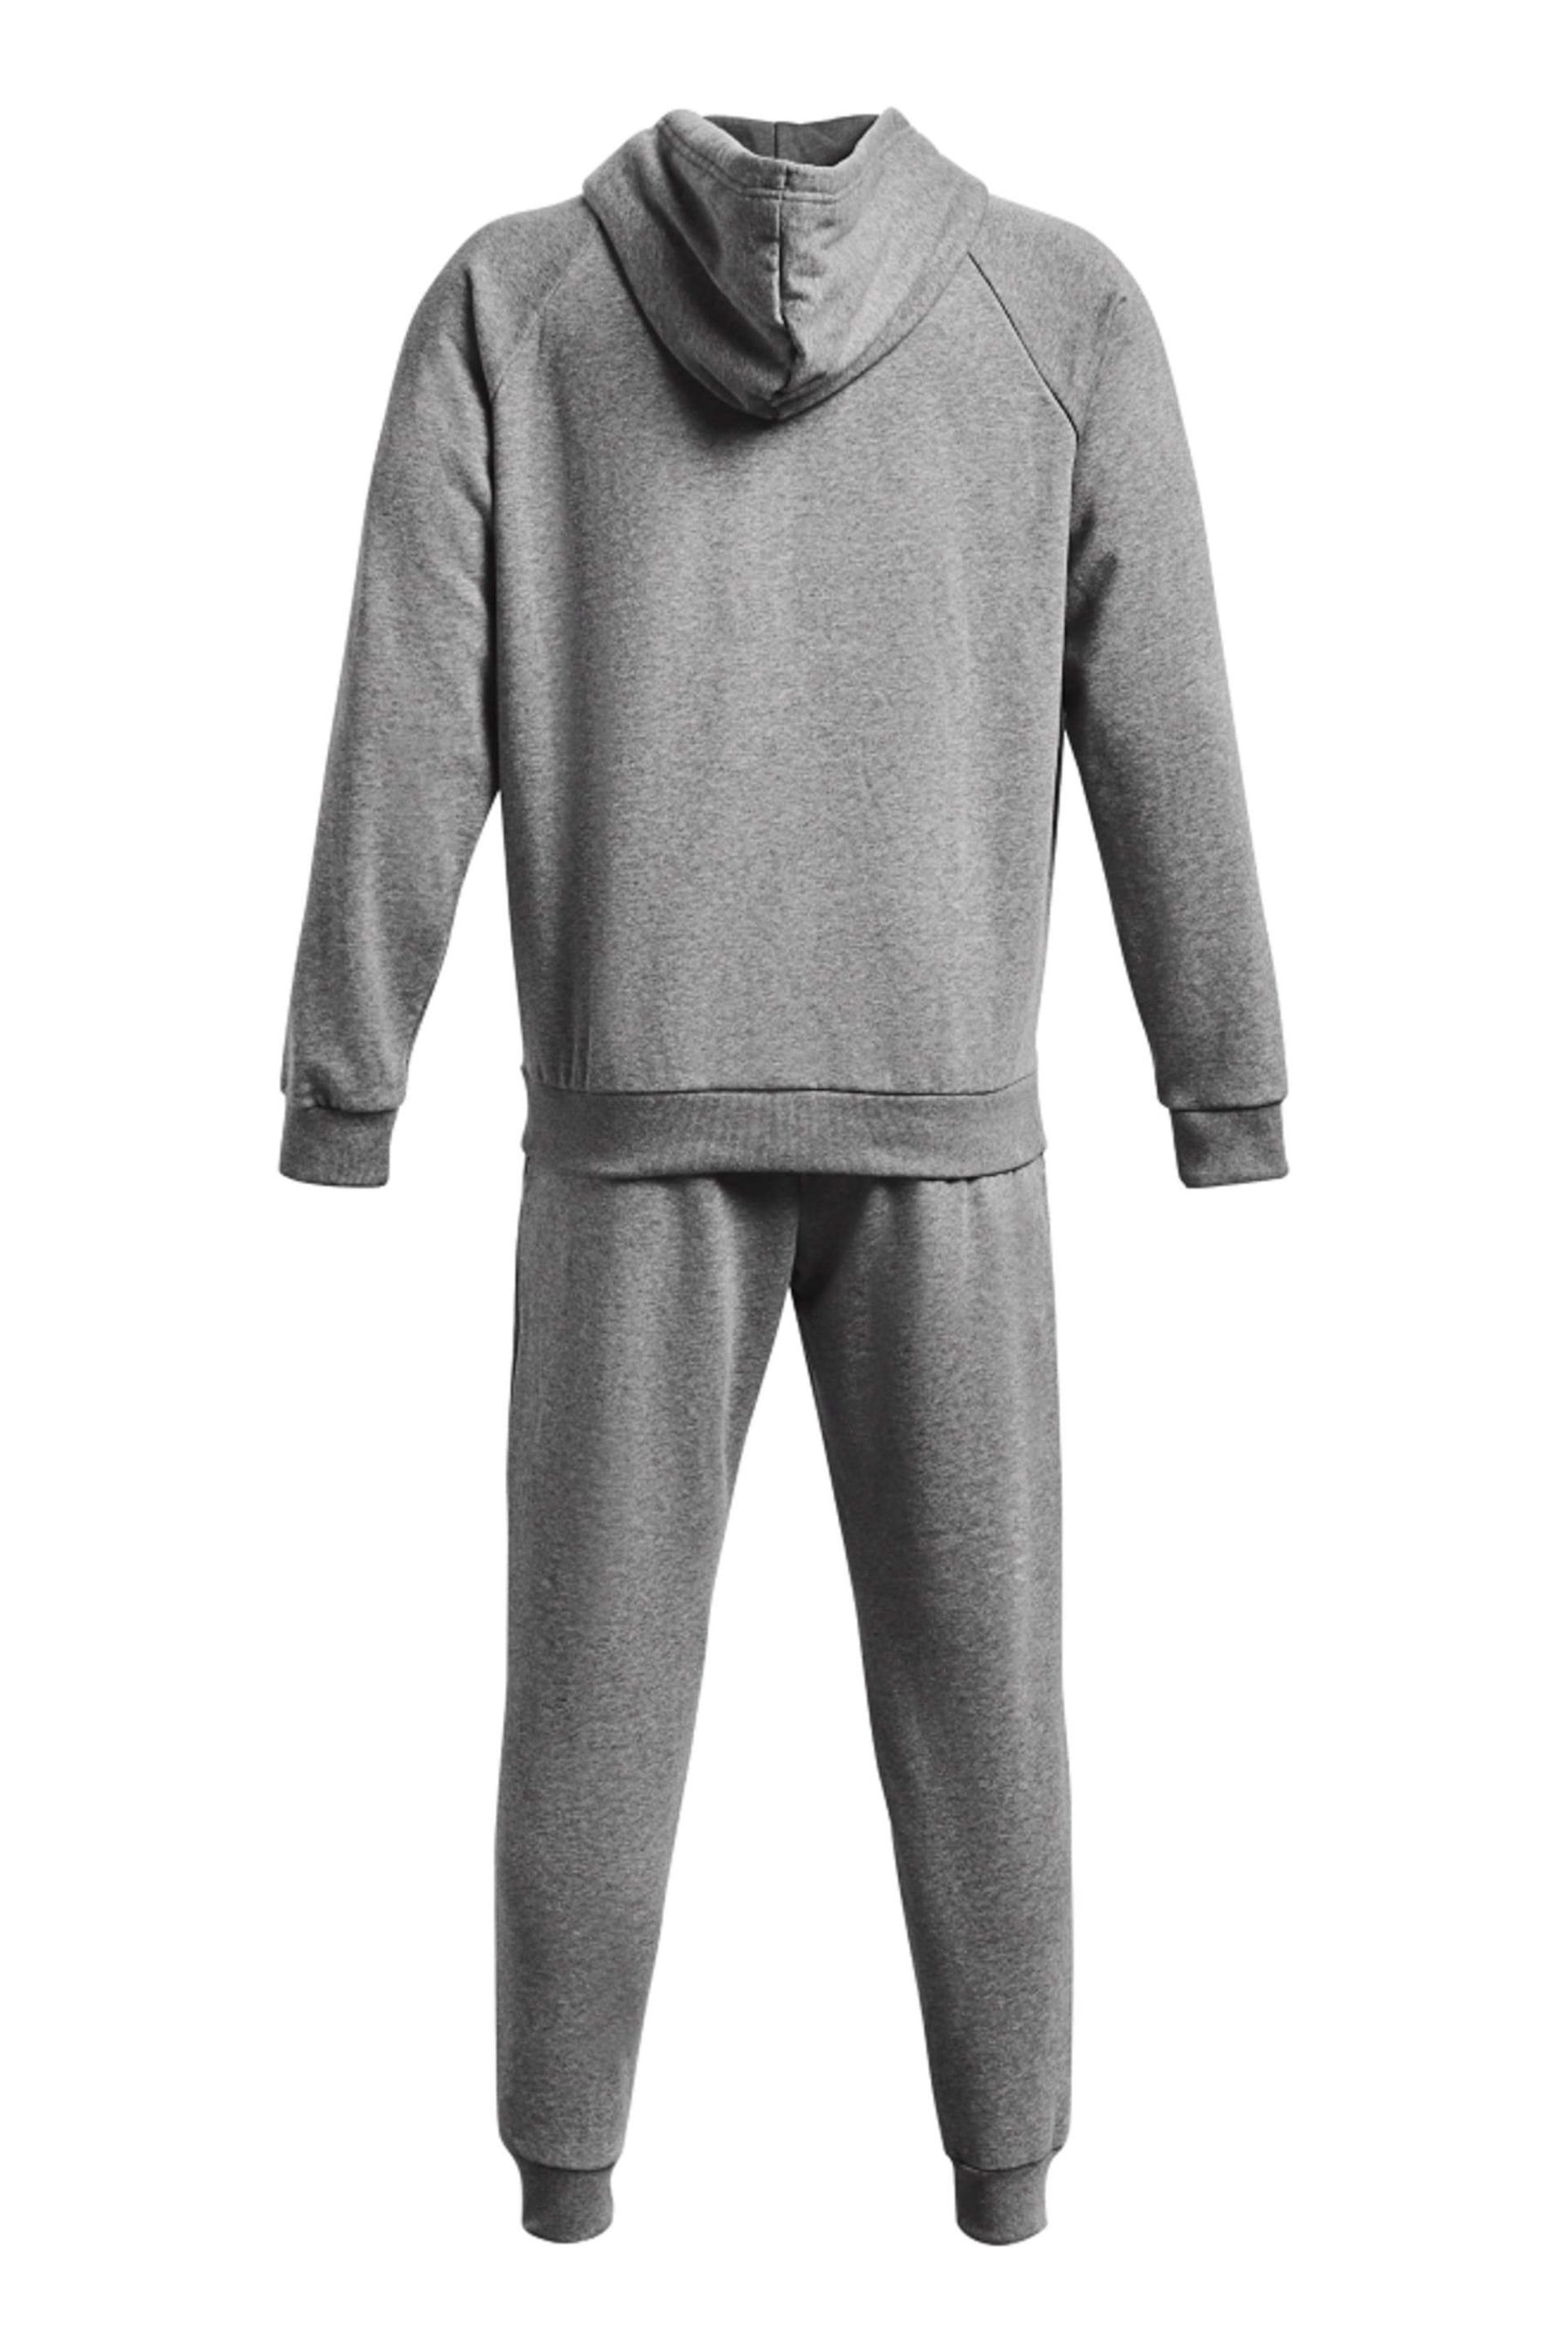 Under Armour Grey/White Under Armour Rival Fleece Tracksuit - Image 4 of 6